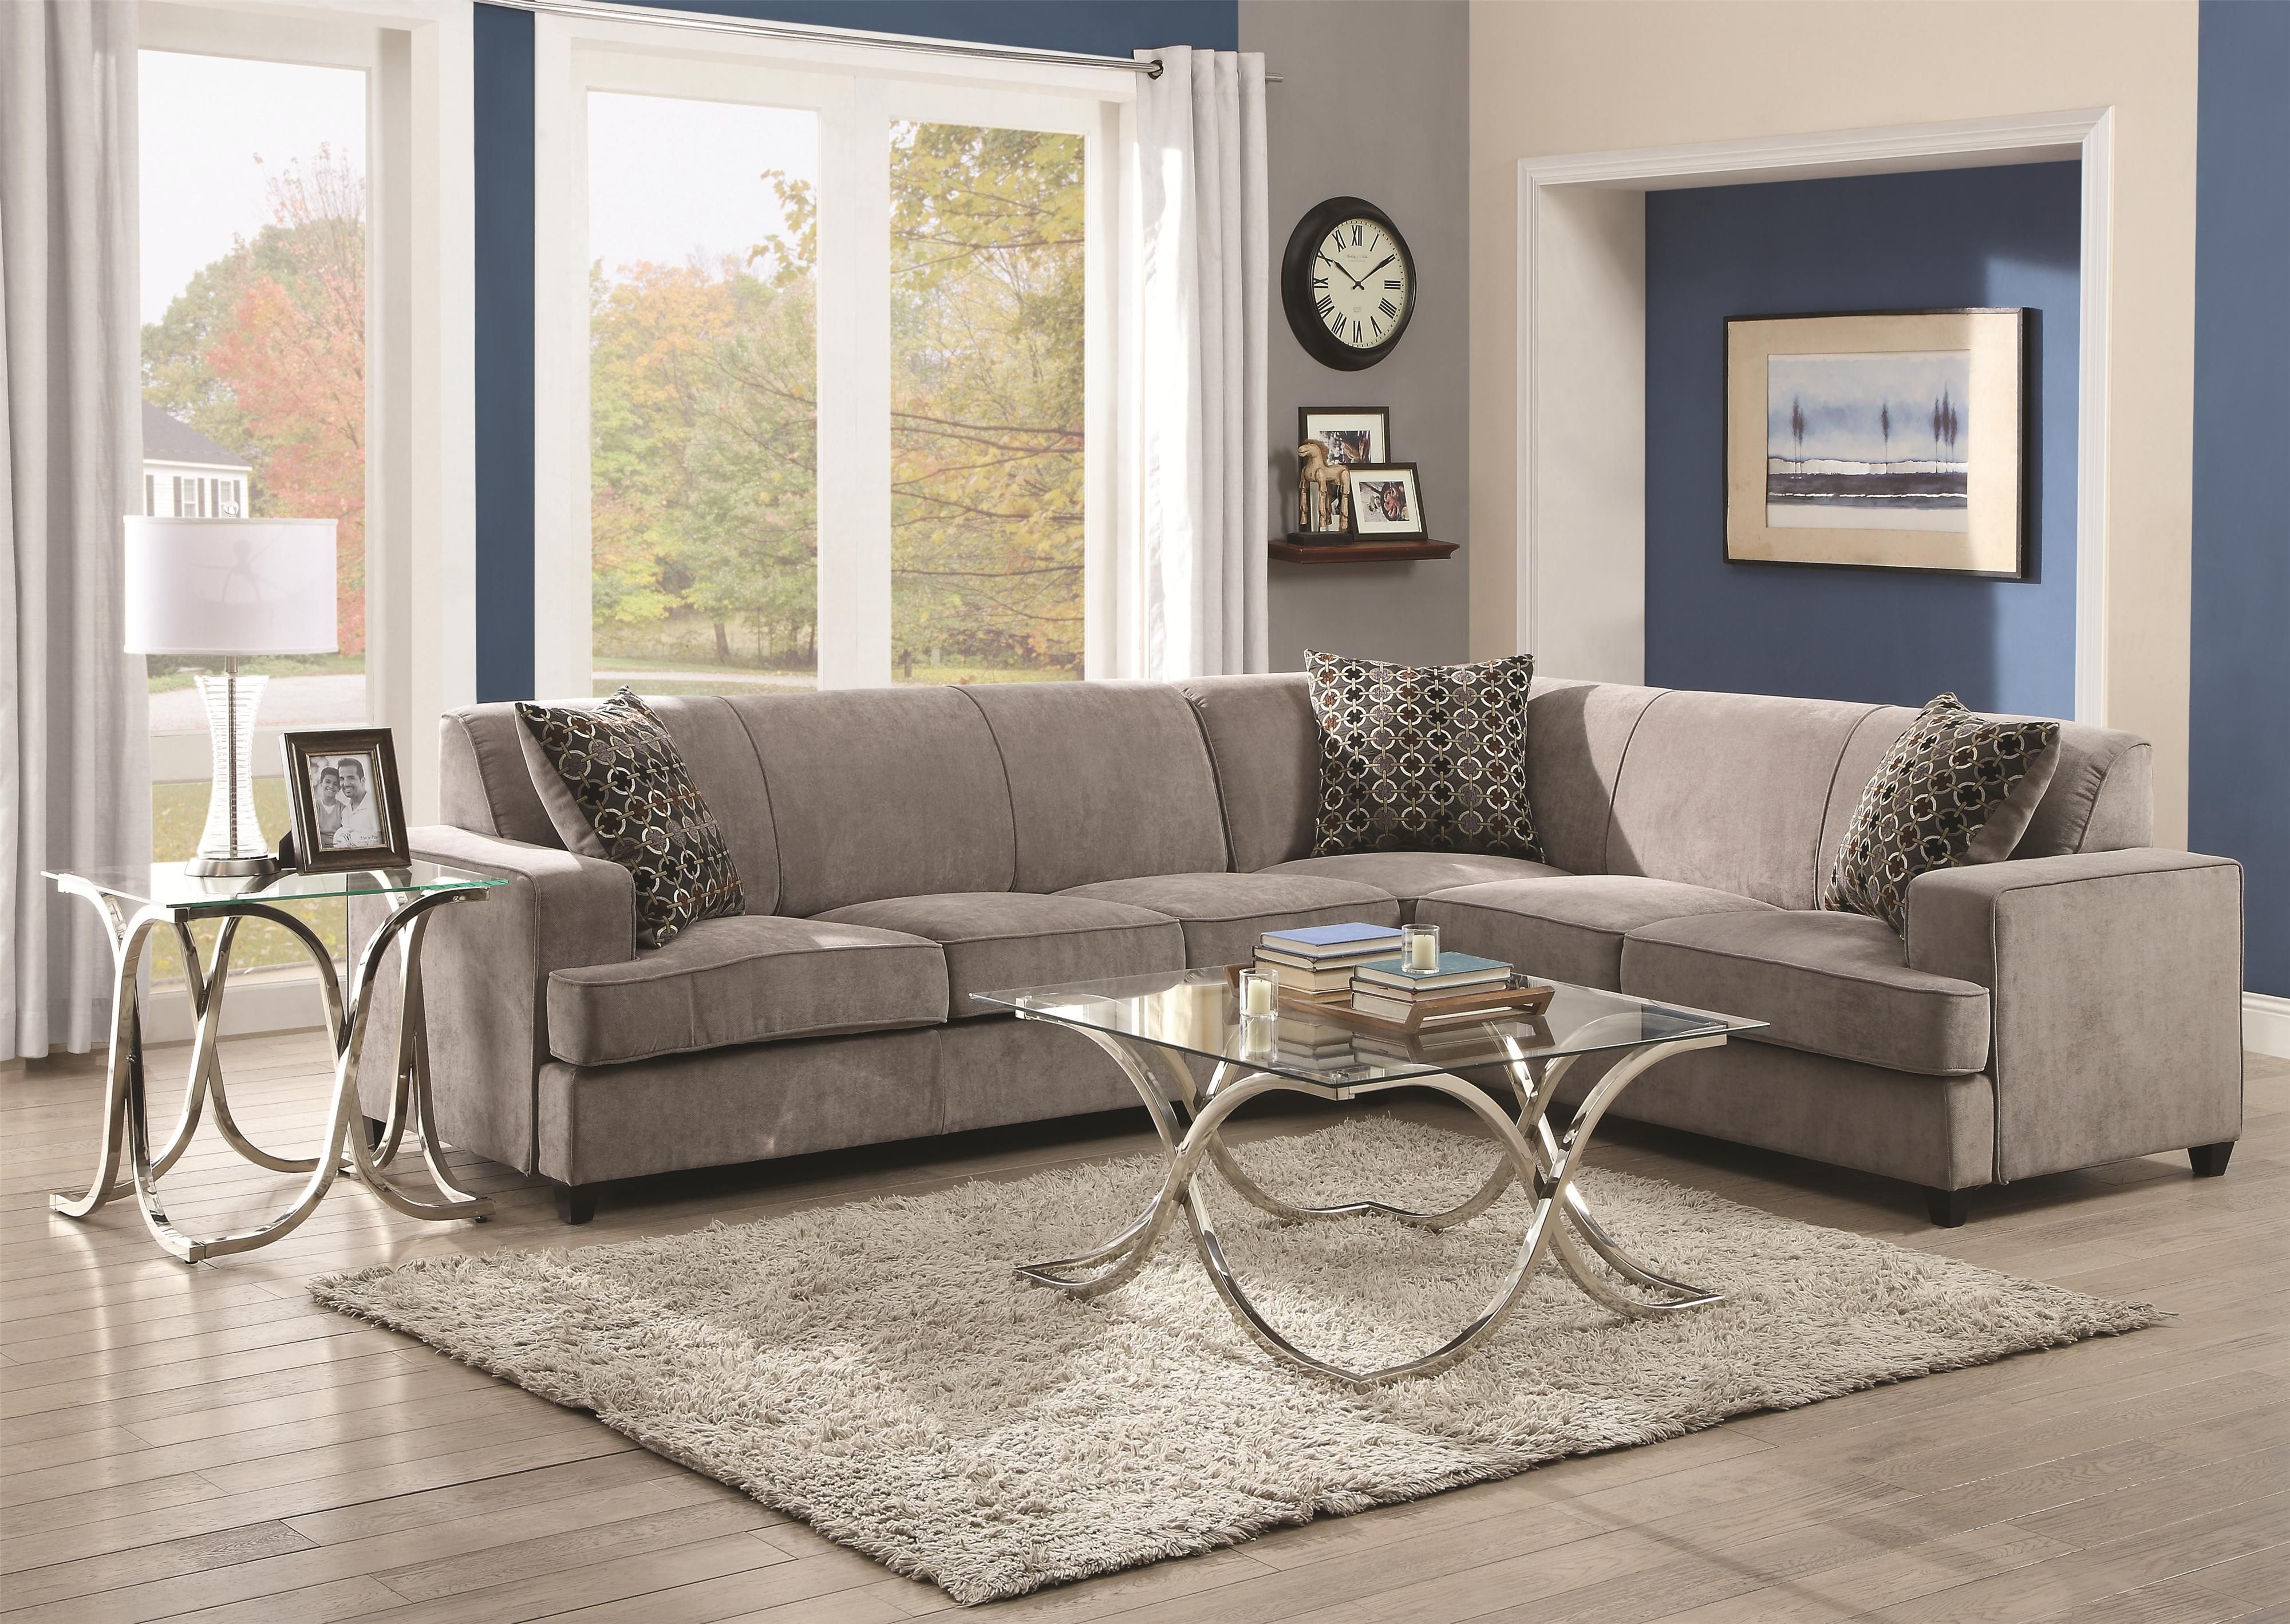 Coaster Sectional Sofa Find A Local Furniture Store With Coaster With Camel Colored Sectional Sofa (Photo 9 of 15)